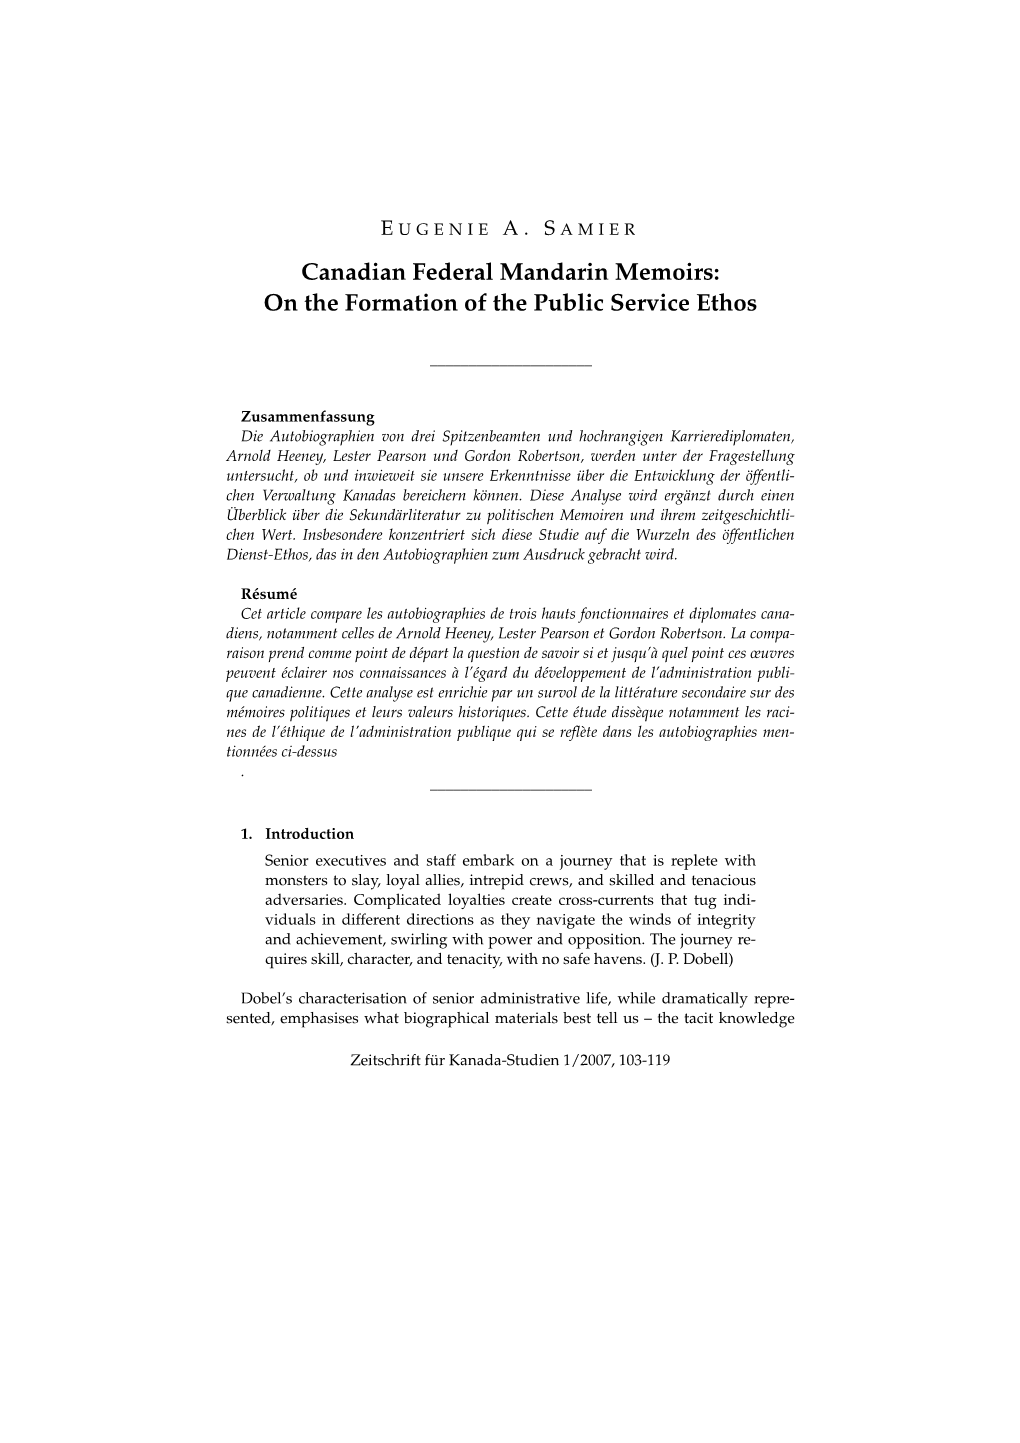 Canadian Federal Mandarin Memoirs: on the Formation of the Public Service Ethos